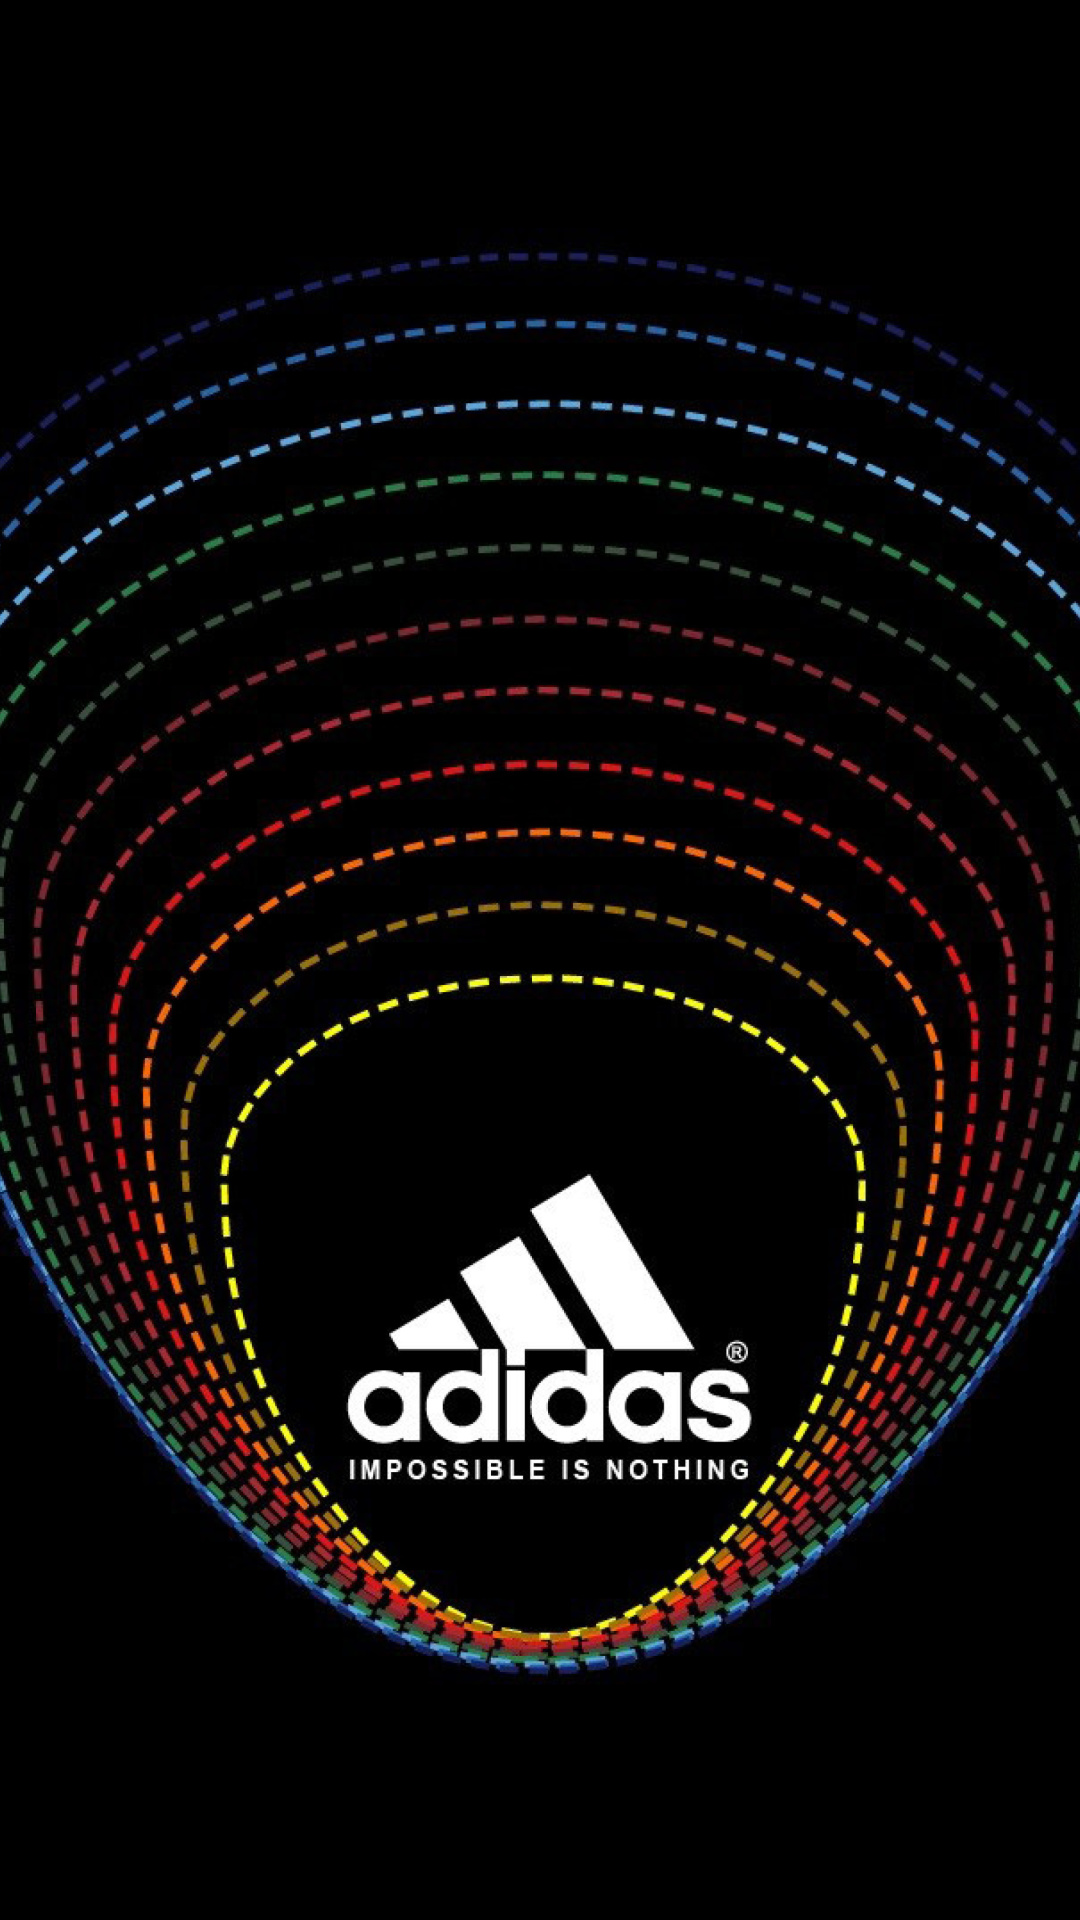 Обои Adidas Tagline, Impossible is Nothing 1080x1920